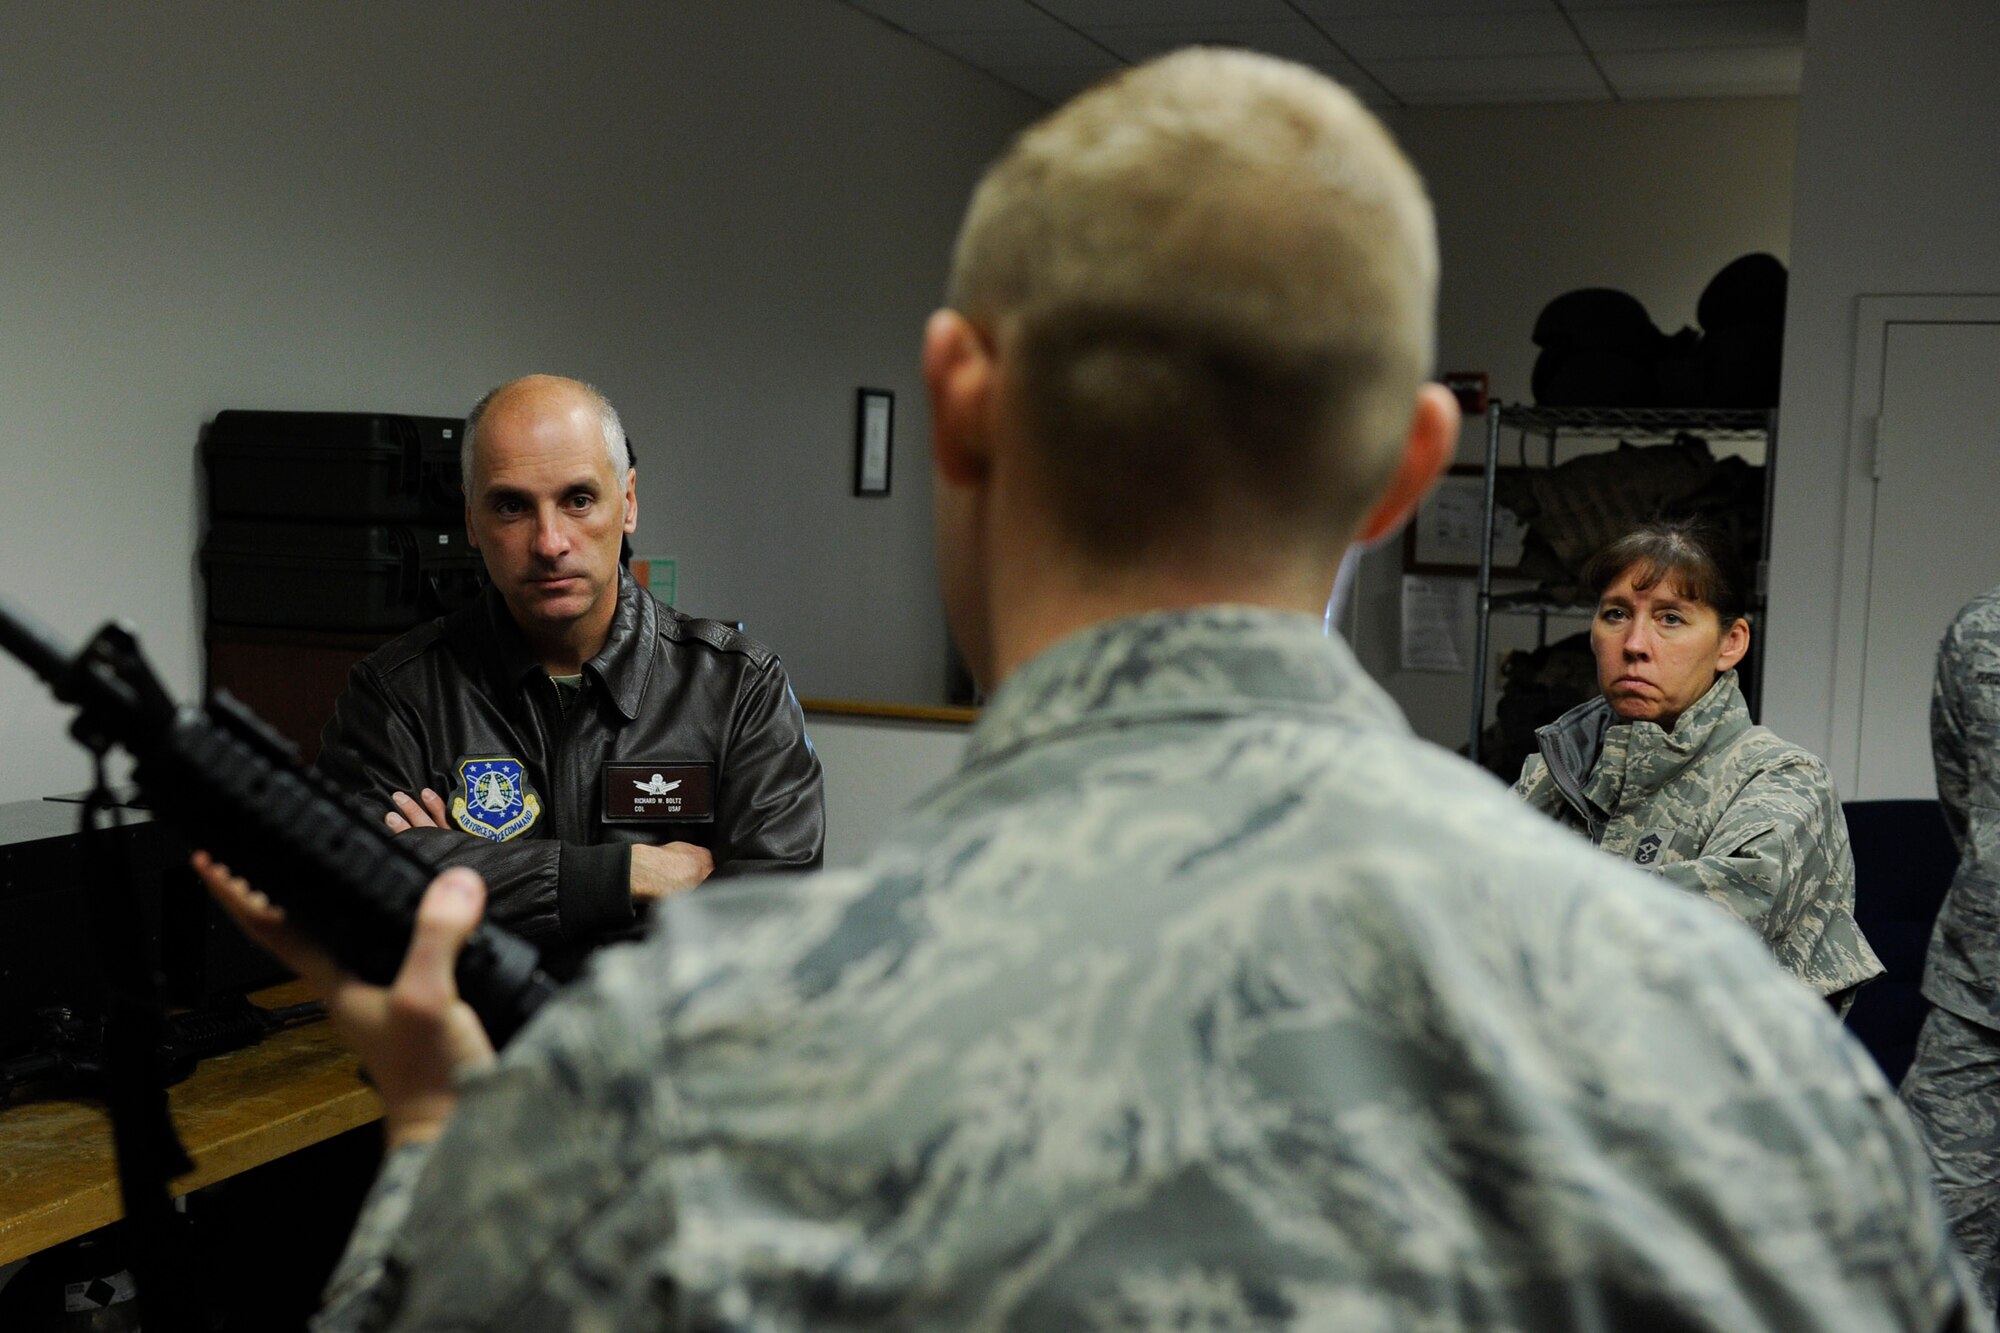 VANDENBERG AIR FORCE BASE, Calif. -- Col. Richard Boltz, the 30th Space Wing commander, and Chief Master Sgt. Suzanne Talbert, the 30th SW command chief, receive a briefing on the 30th Security Forces Squadron's new firearms training simulator at Combat Arms here Thursday, Dec. 15th, 2011. The new simulator provides a virtual training environment for Vandenberg members to practice real world combat tactics and train with firearms qualification scenarios. (U.S. Air Force/Staff Sgt. Levi Riendeau)